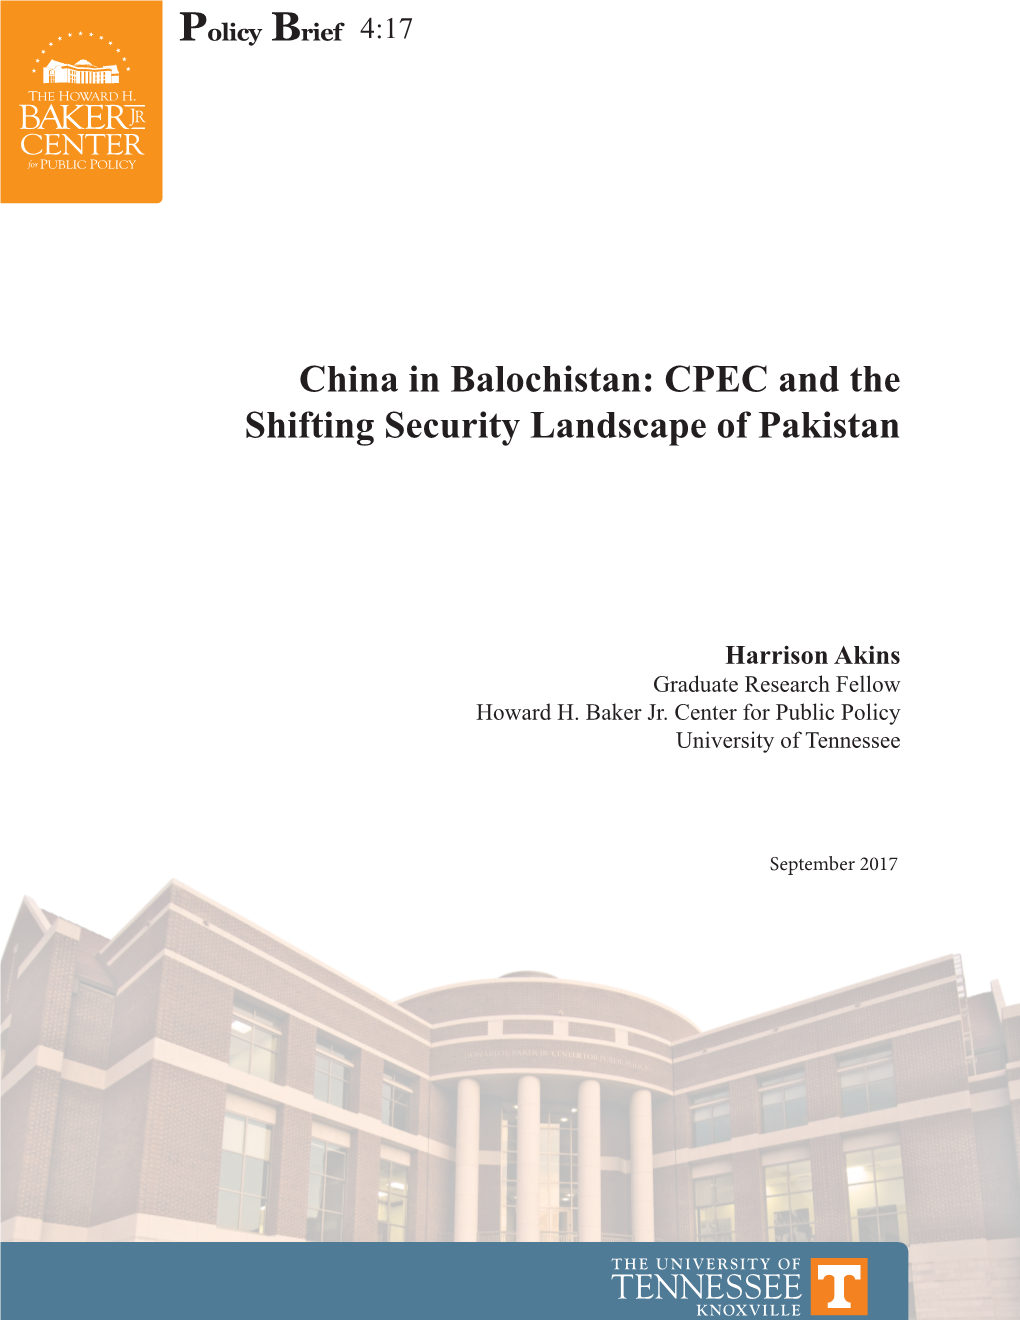 China in Balochistan: CPEC and the Shifting Security Landscape of Pakistan